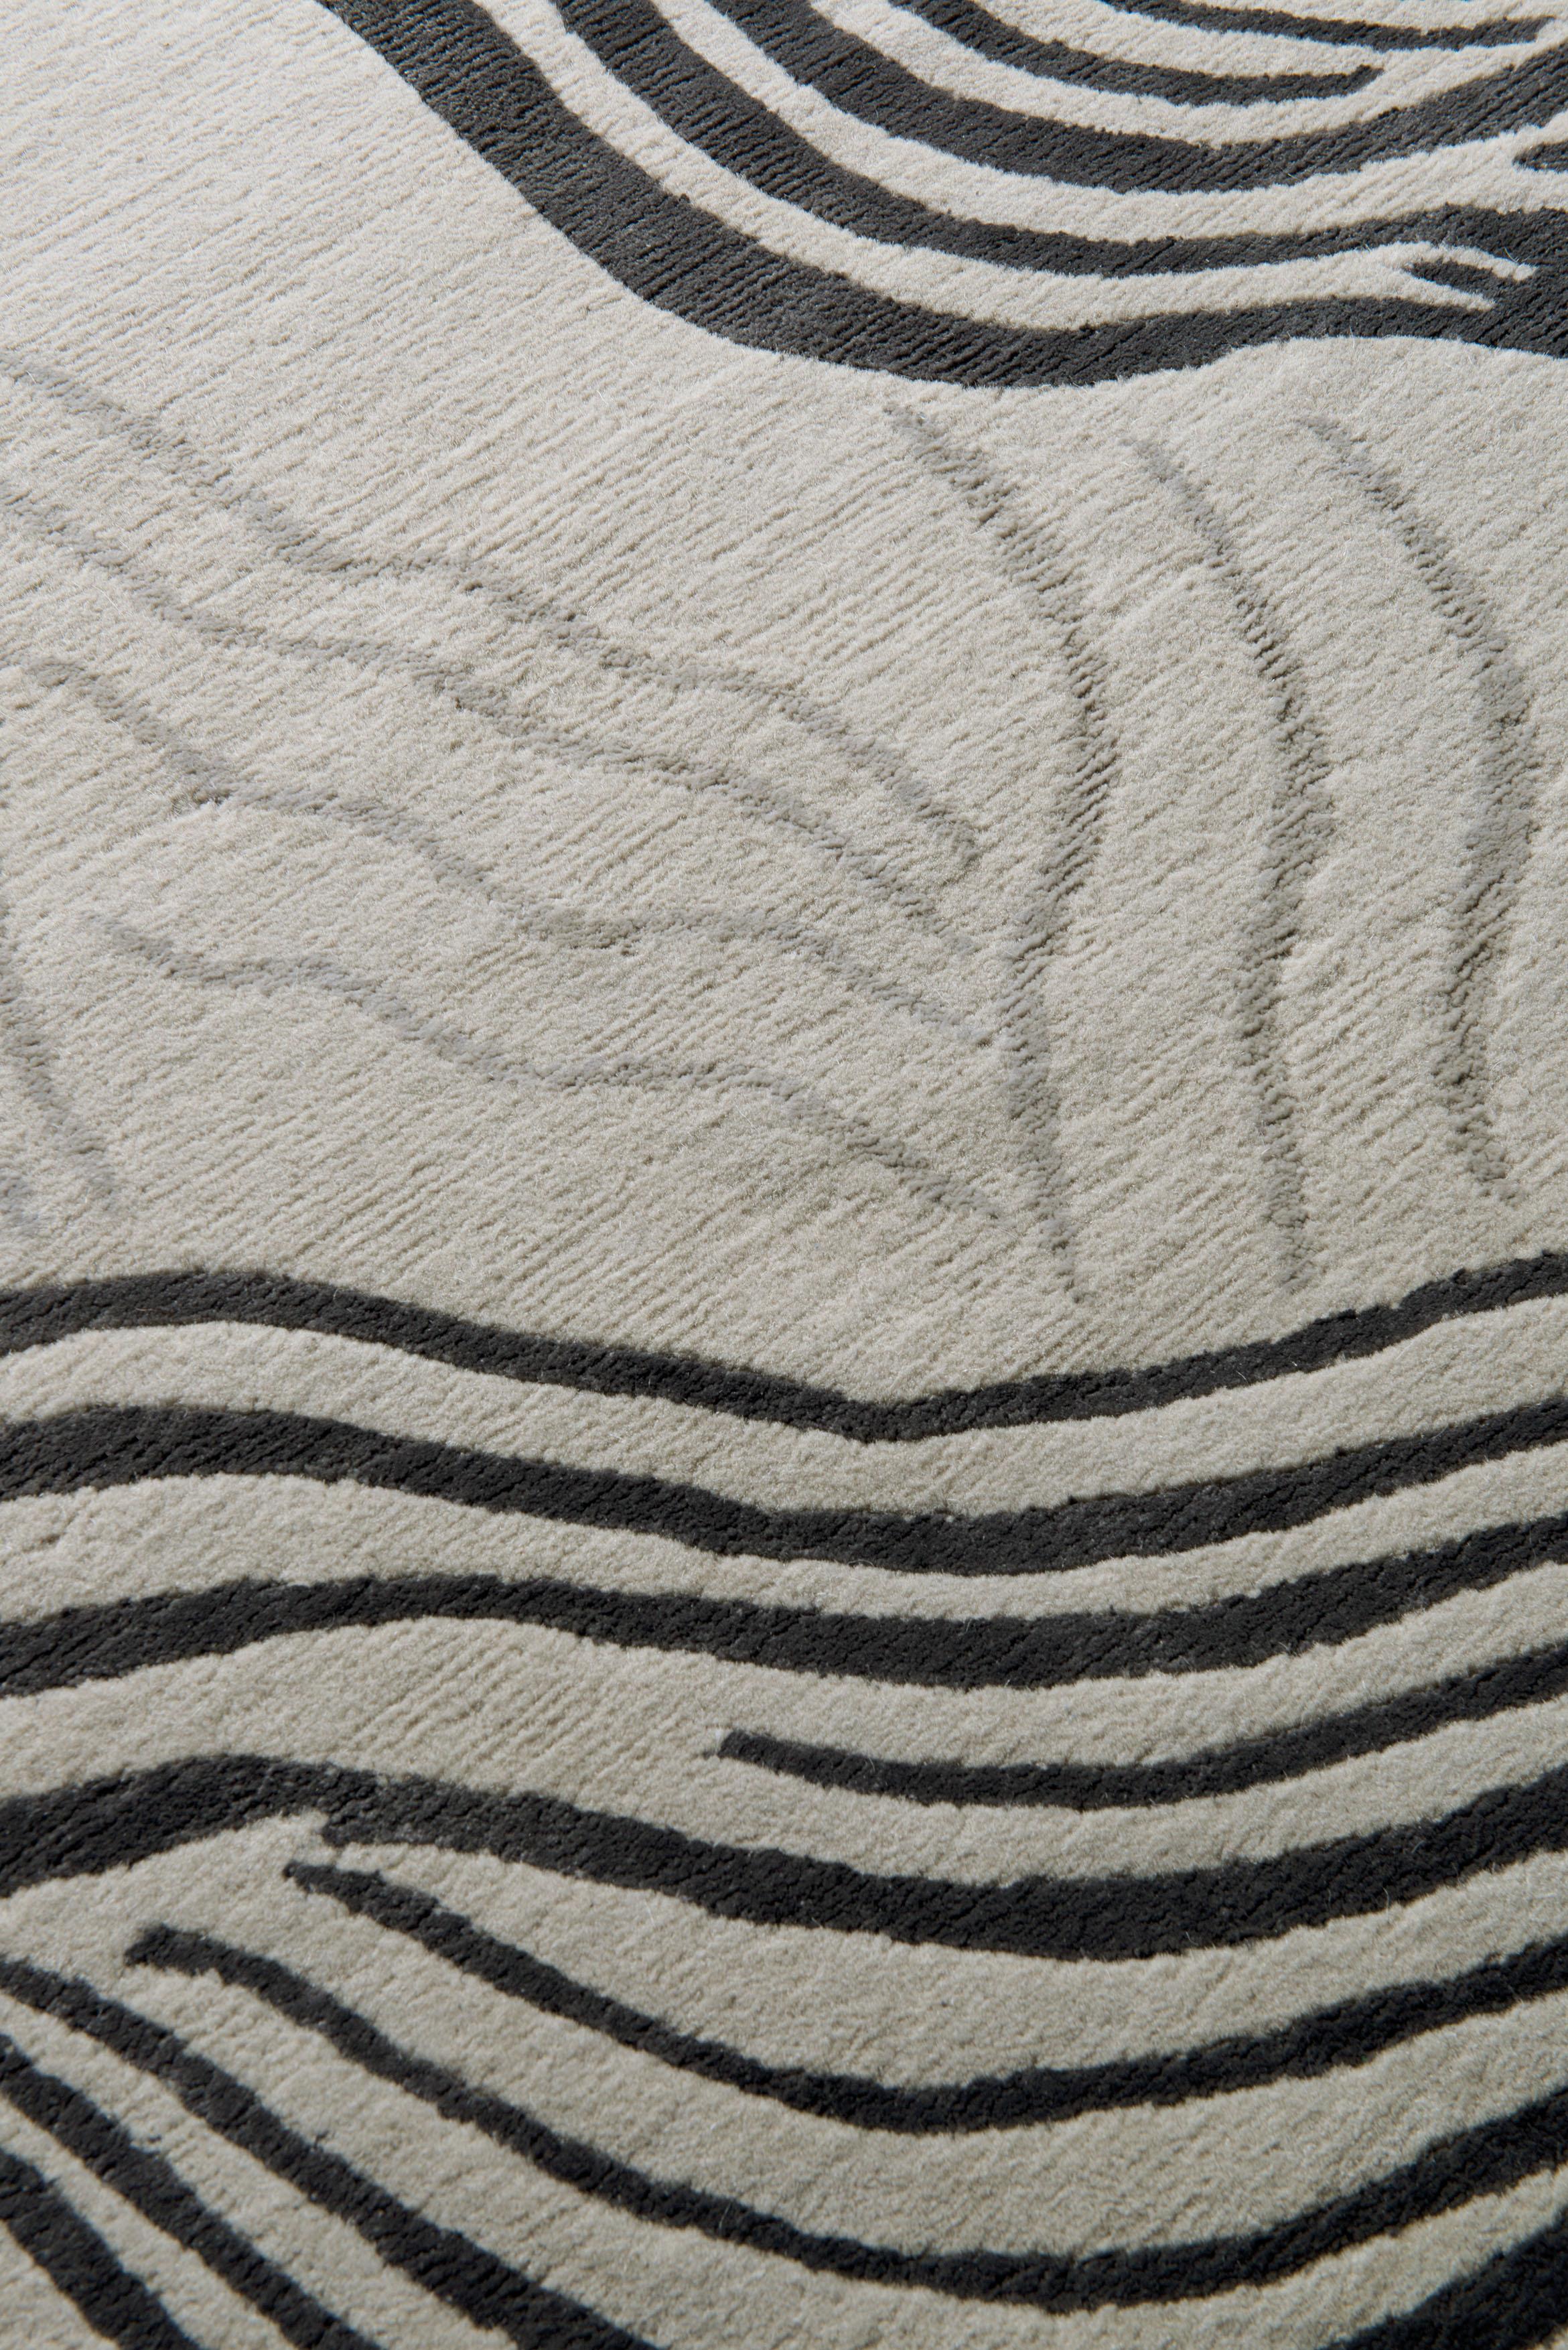 Wake is a hand painted design inspired by the fluidity of water. Kelly Wearstler says: It is a confident yet transitional pattern. The intricacy of the line work feels sophisticated, while layered hues channel a sense of rich dimension and texture.